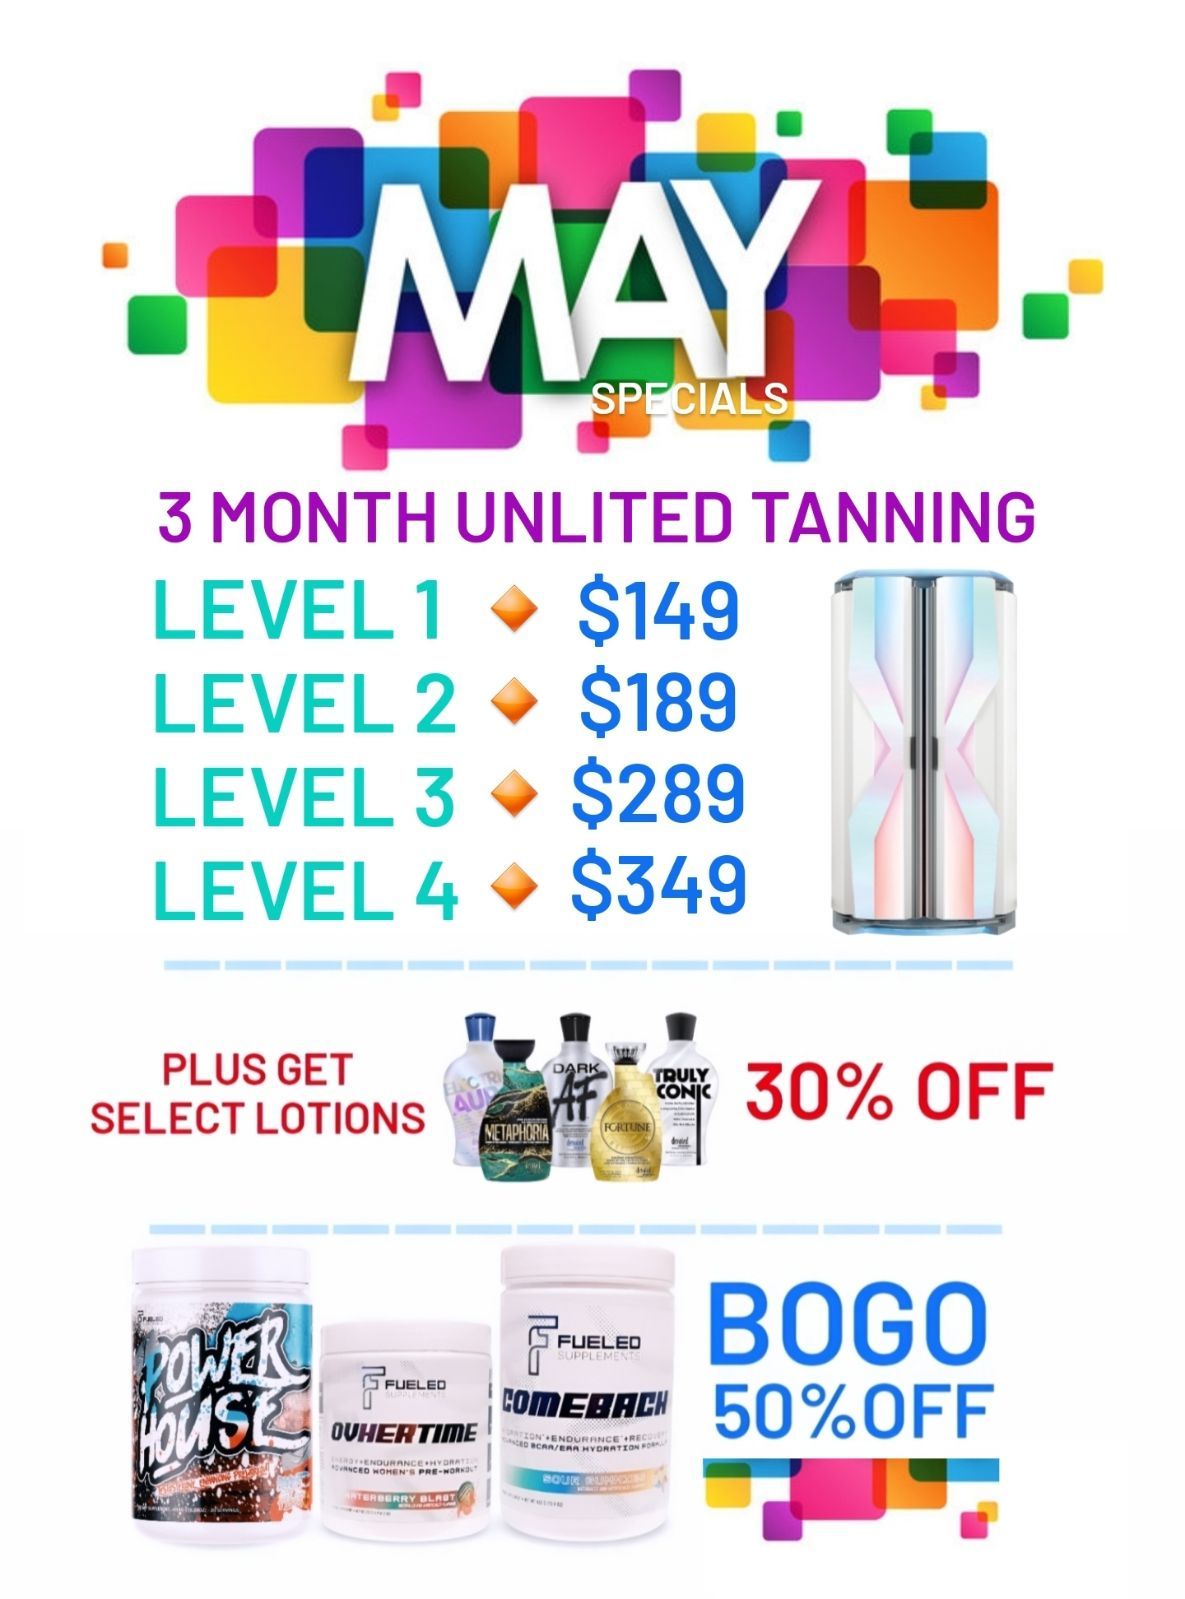 Tanning Monthly Specials